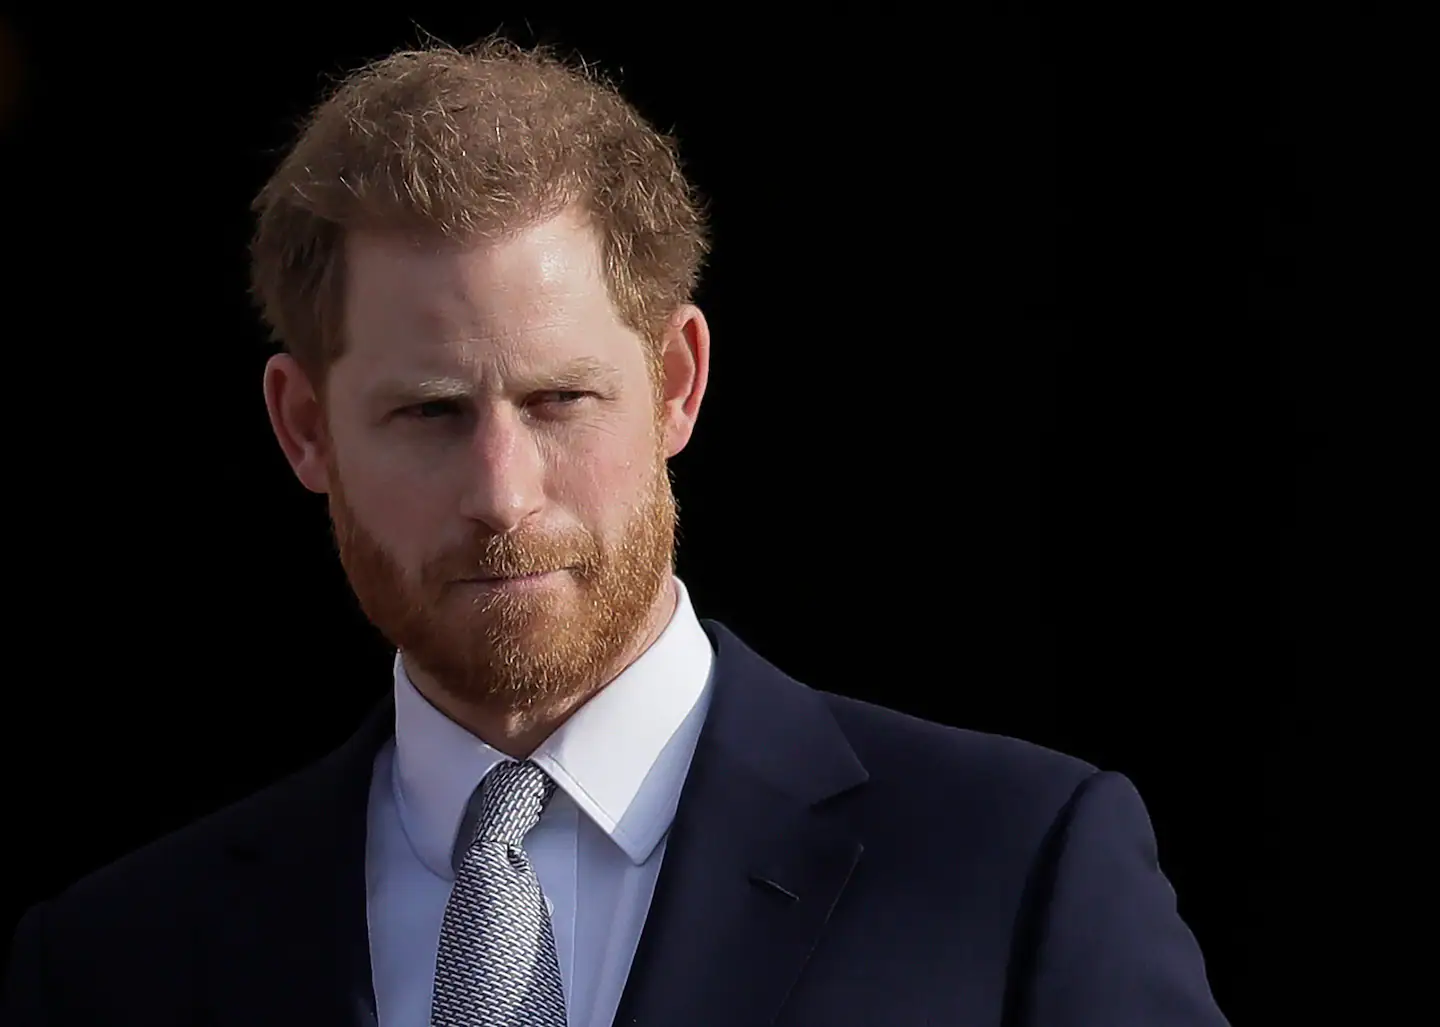 Prince Harry joins the American plutocracy